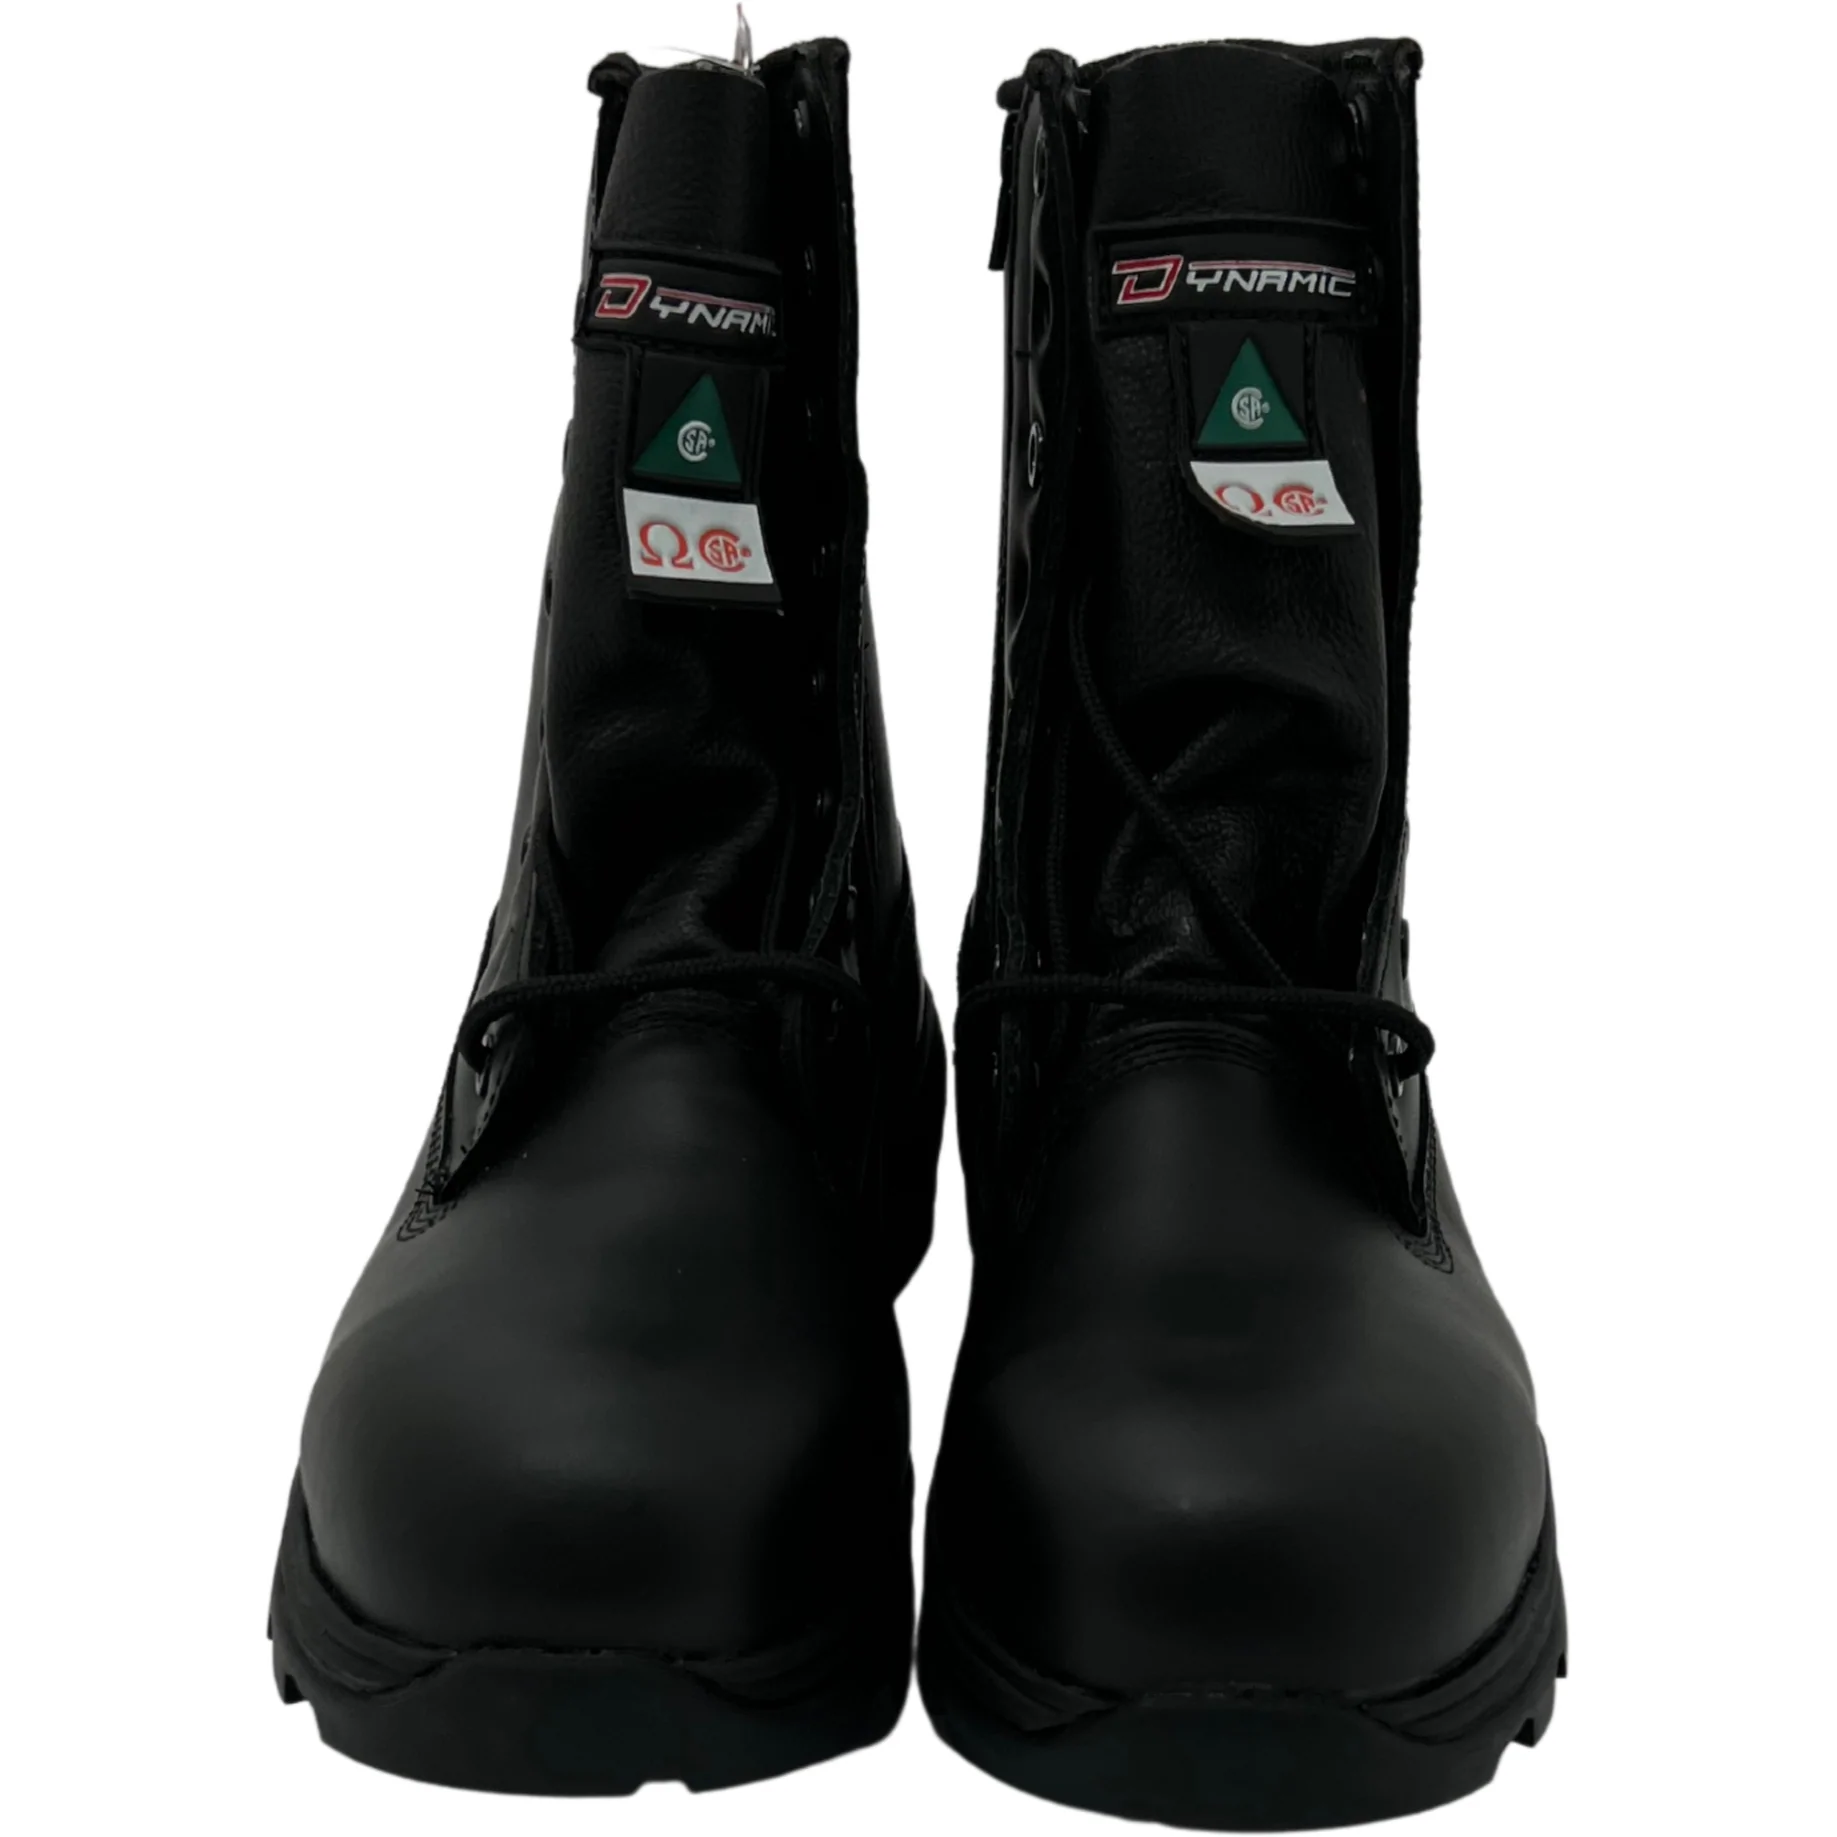 Dynamic Men's Work Boots / Safety Boots / Black / Size 8